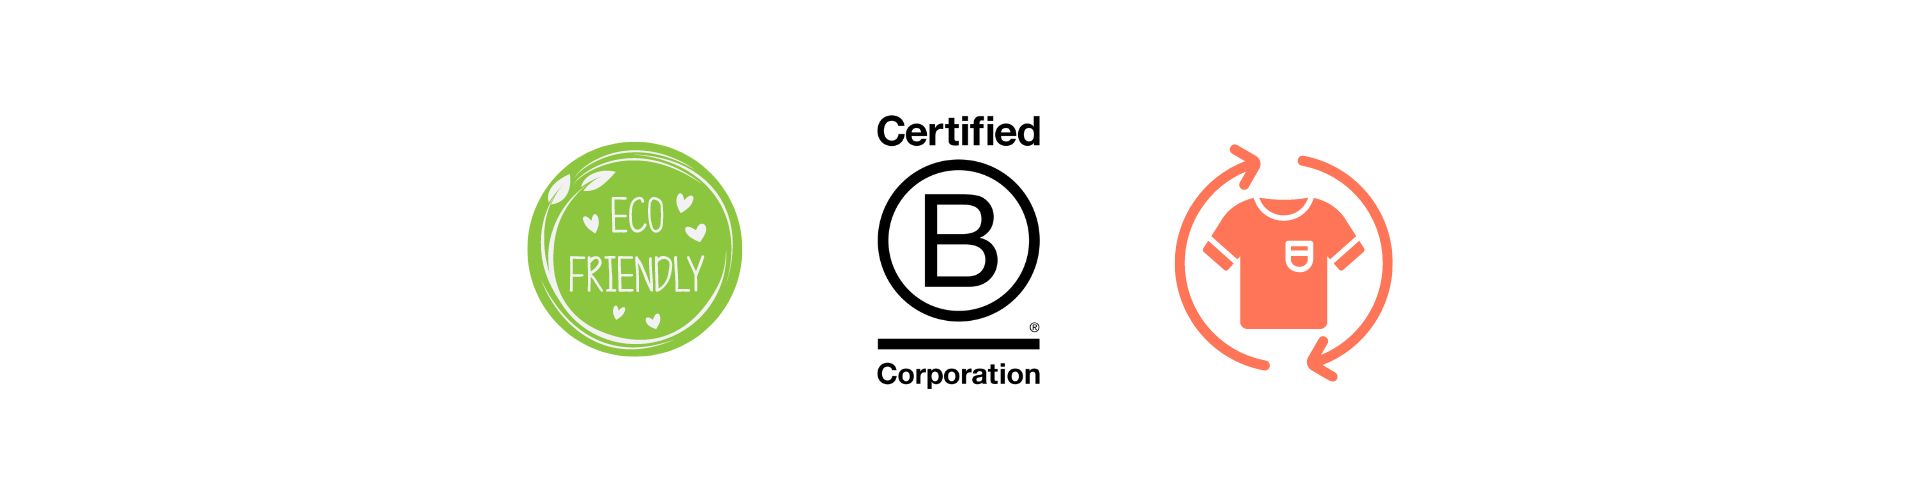 Merry Go Rounds B Corp and eco Friendly Icons